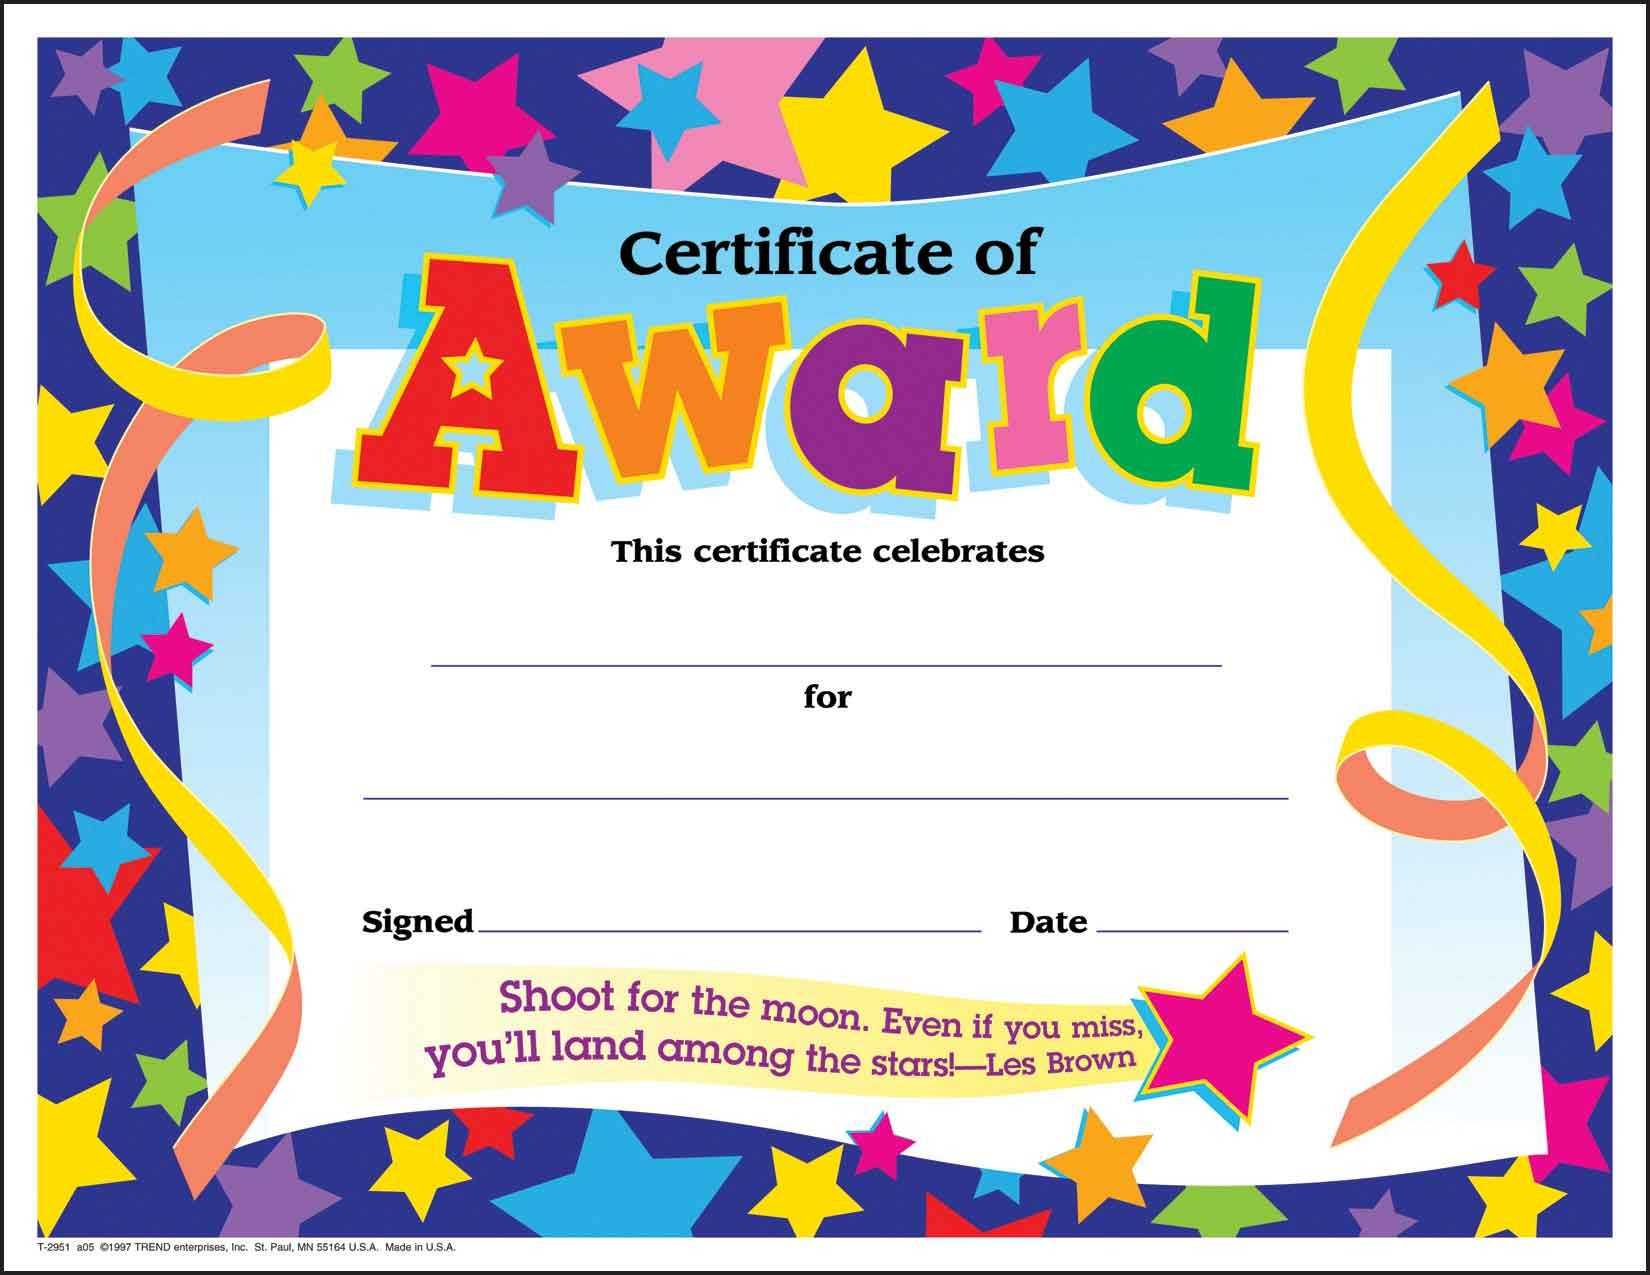 Certificate Template For Kids Free Certificate Templates With Certificate Of Achievement Template For Kids